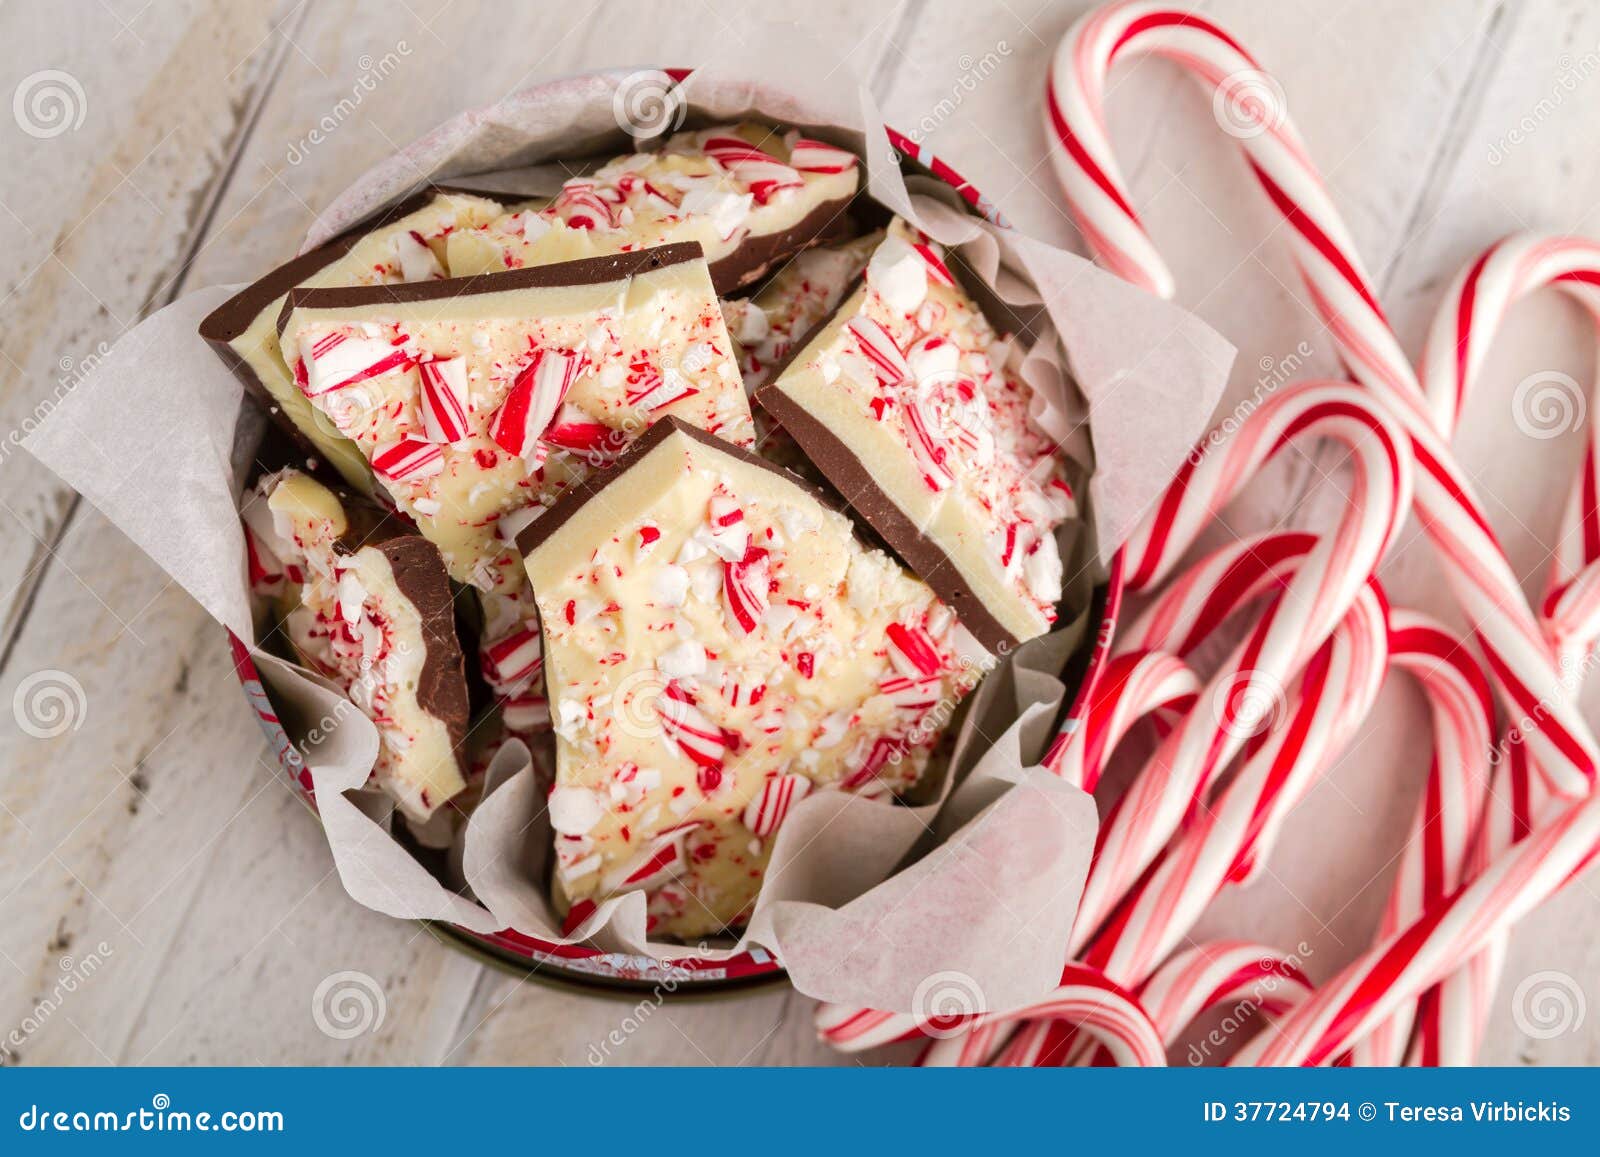 traditional holiday chocolate peppermint bark